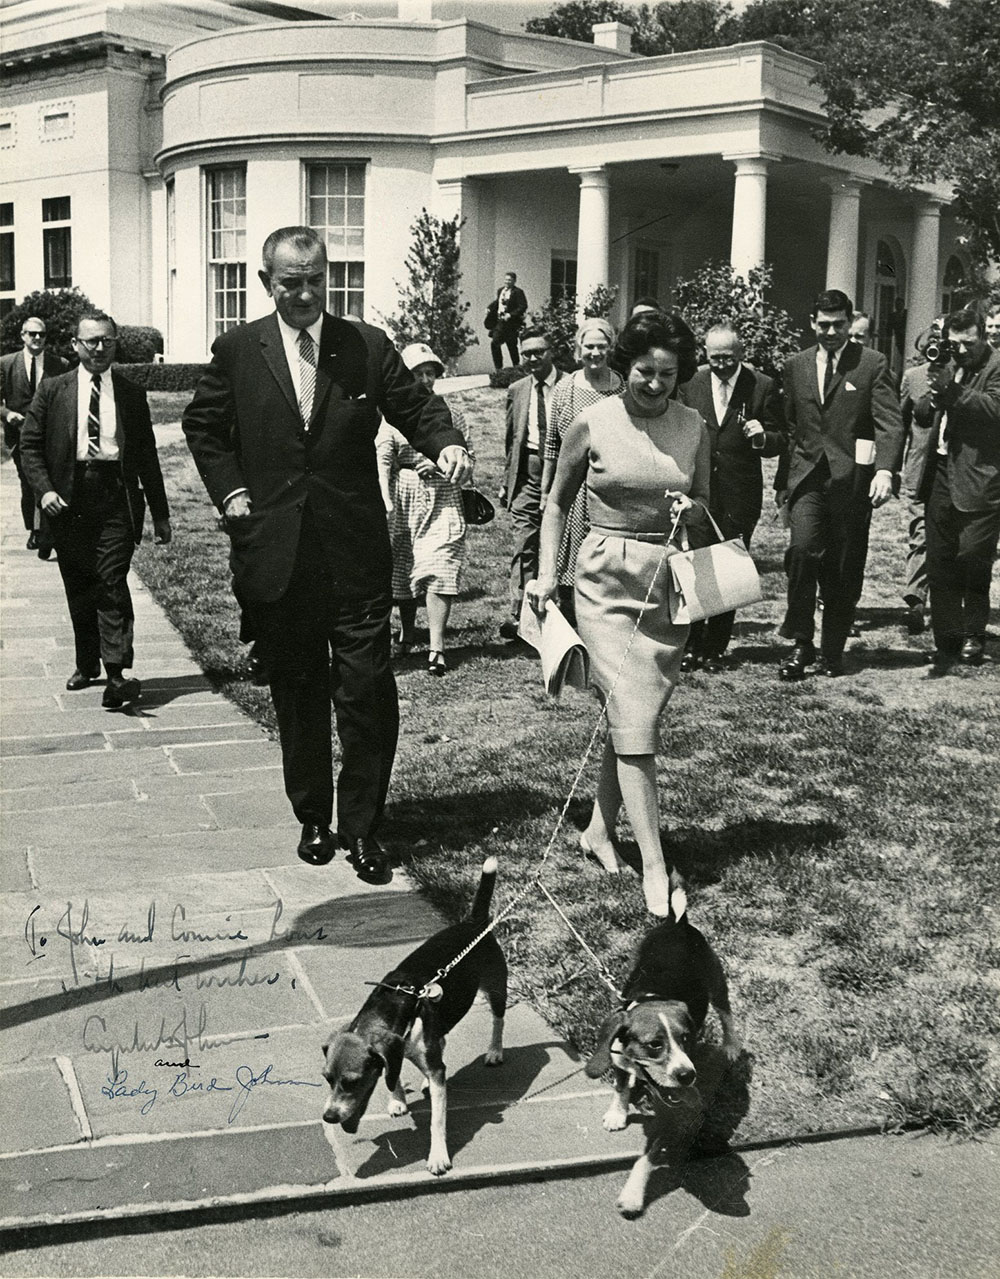 Photograph of President Lyndon B. Johnson and Lady Bird Johnson walking presidential beagles, Him and Her, on the White House lawn.